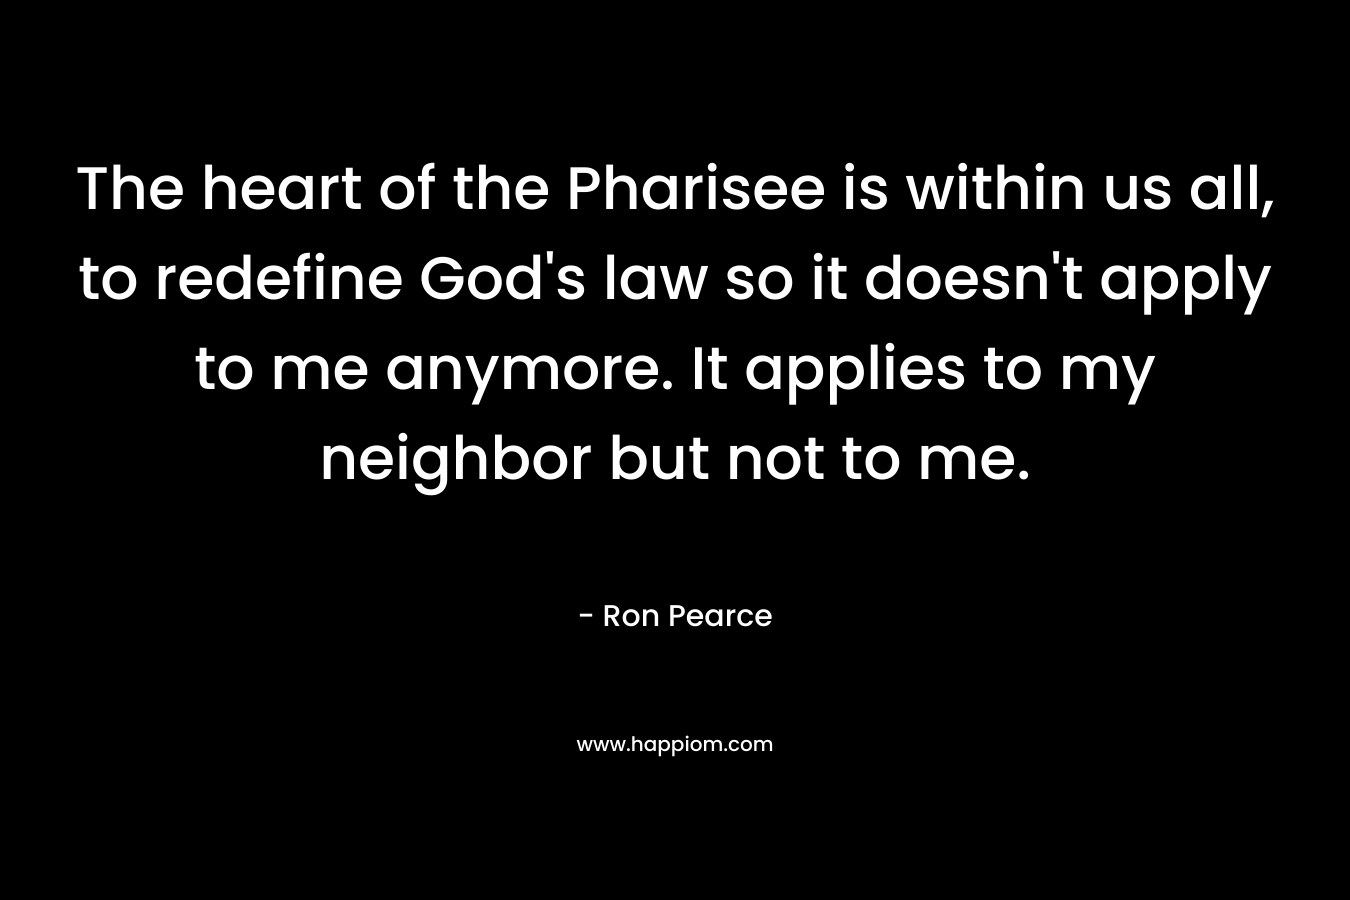 The heart of the Pharisee is within us all, to redefine God’s law so it doesn’t apply to me anymore. It applies to my neighbor but not to me. – Ron Pearce